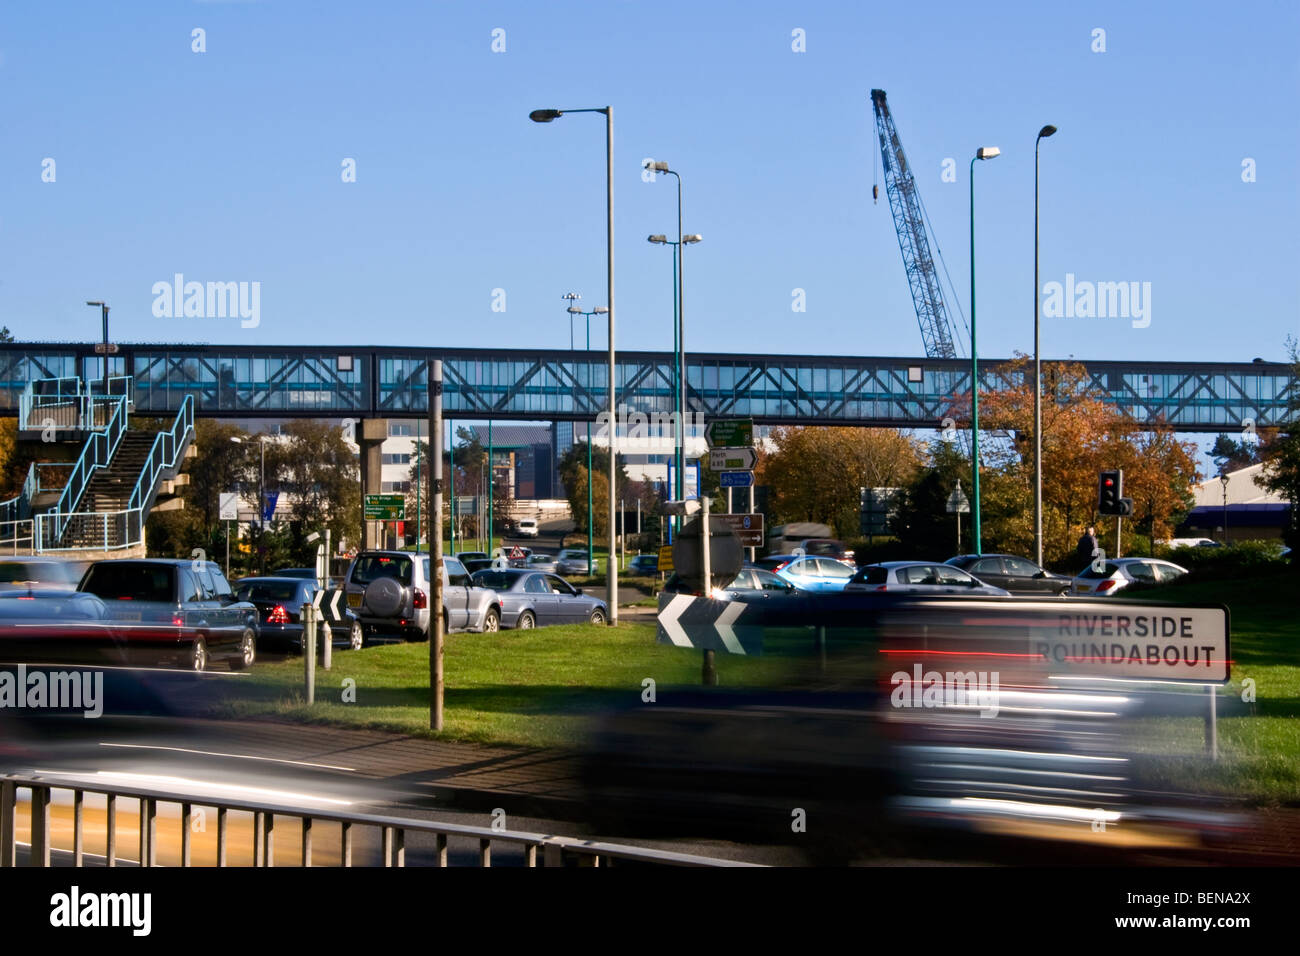 Queue of cars travelling around the Riverside roundabout and slowing down due to tailbacks on at the lights in Dundee, UK Stock Photo